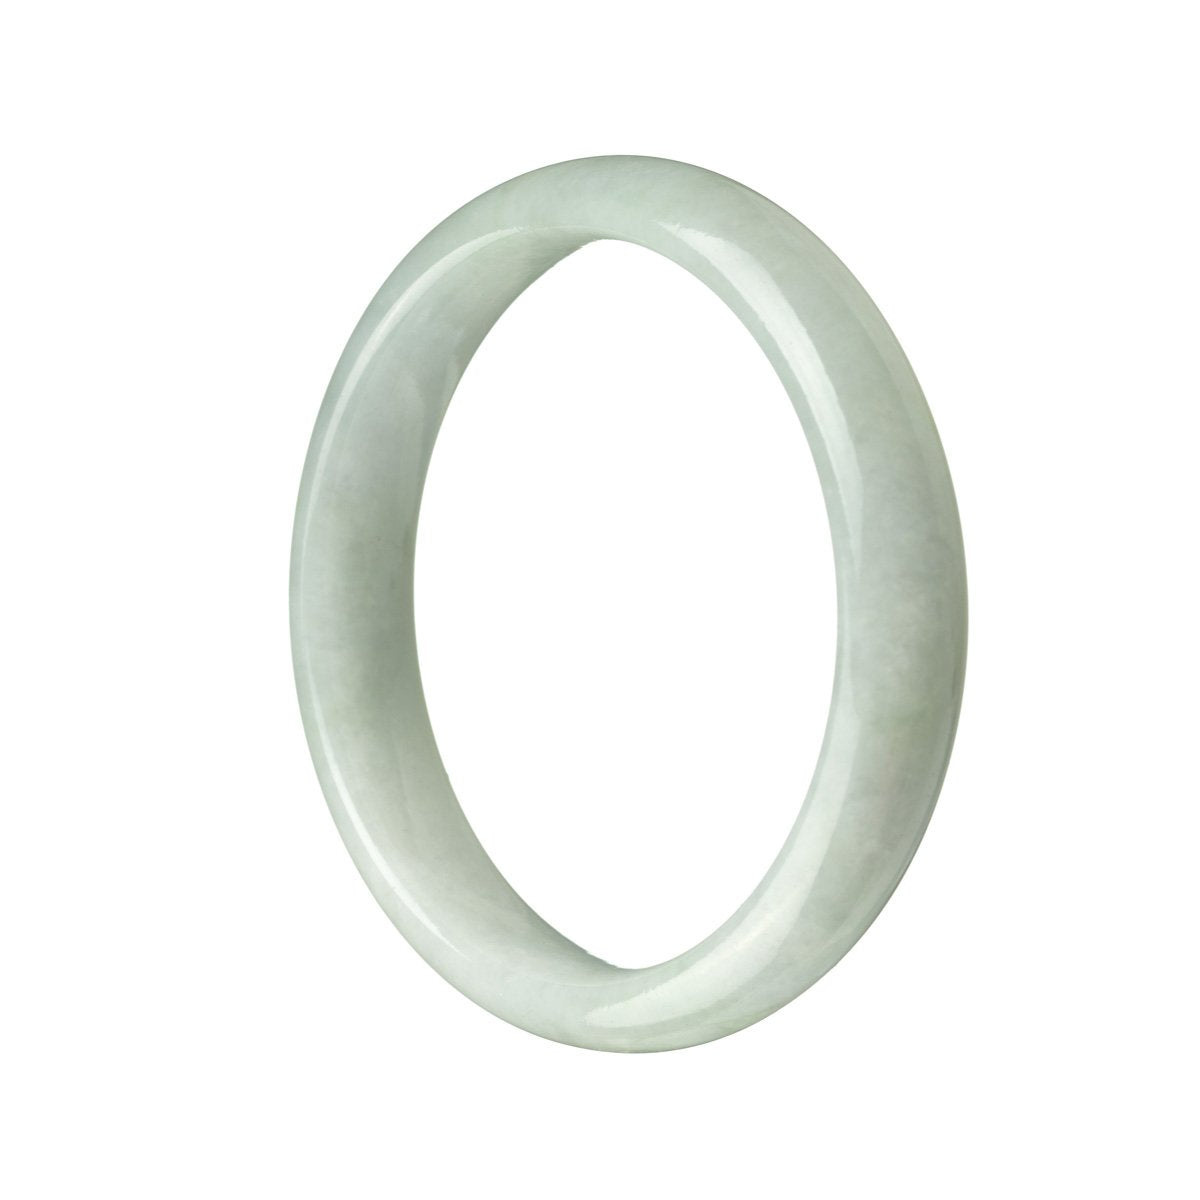 Close-up of a pale green jade bracelet with a semi-round shape, measuring 56mm. Crafted from Grade A jadeite jade, this elegant bracelet from MAYS GEMS shines with its natural beauty.